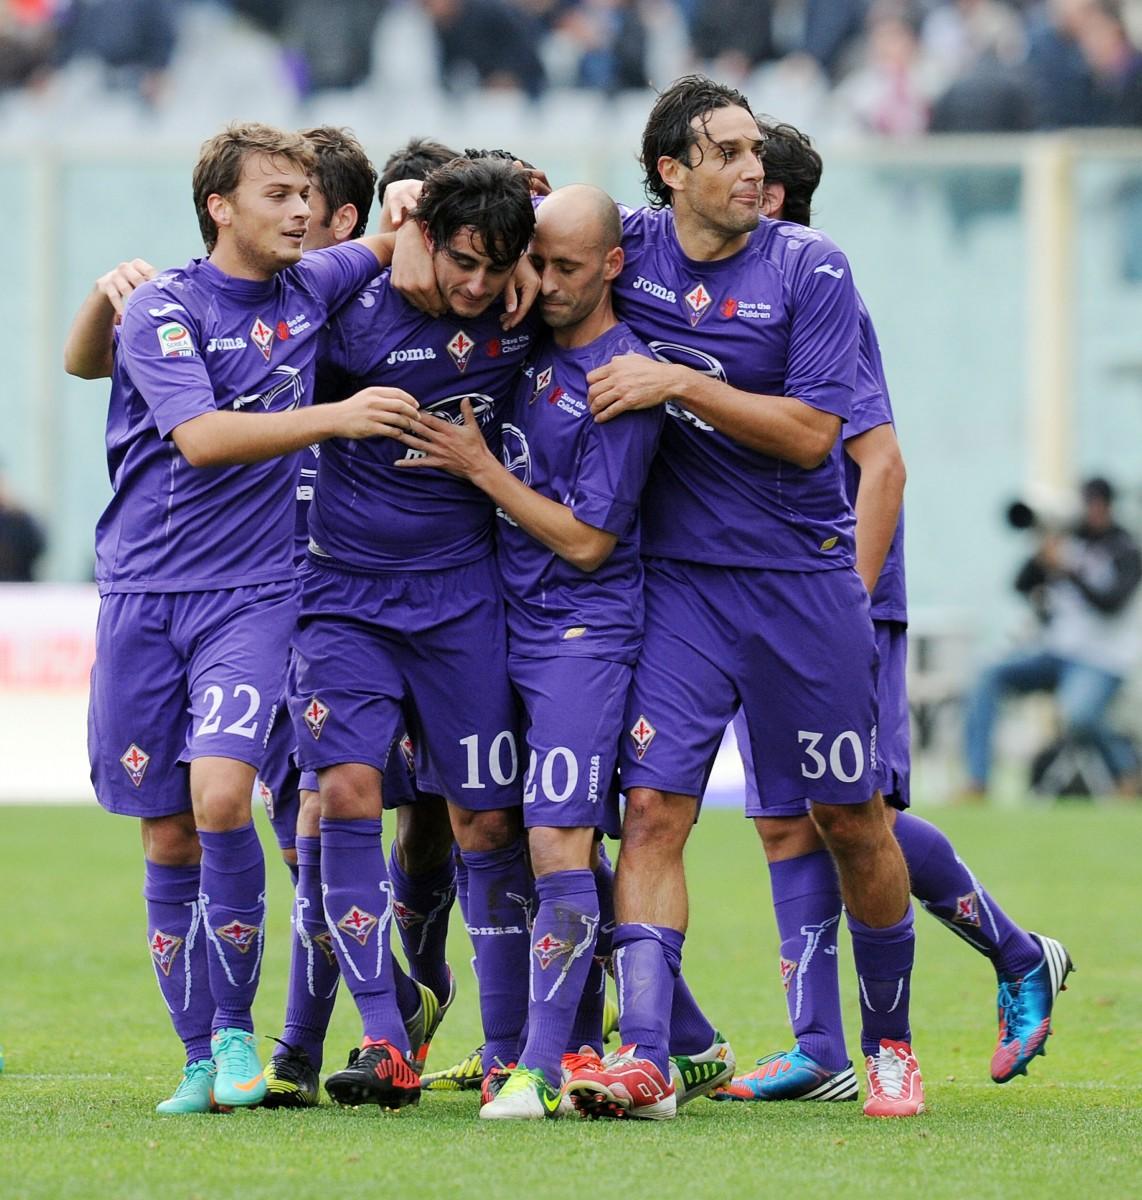 <a><img class="size-full wp-image-1774368" title="ACF Fiorentina v Atalanta BC - Serie A" src="https://www.theepochtimes.com/assets/uploads/2015/09/Fiorentina156656173.jpg" alt="Alberto Aquilani (No. 10) is congratulated by teammates against Atalanta on Sunday at Artemio Franchi Stadium in Florence, Italy. He was the hero with two goals and an assist. (Giuseppe Bellini/Getty Images) " width="1142" height="1200"/></a>